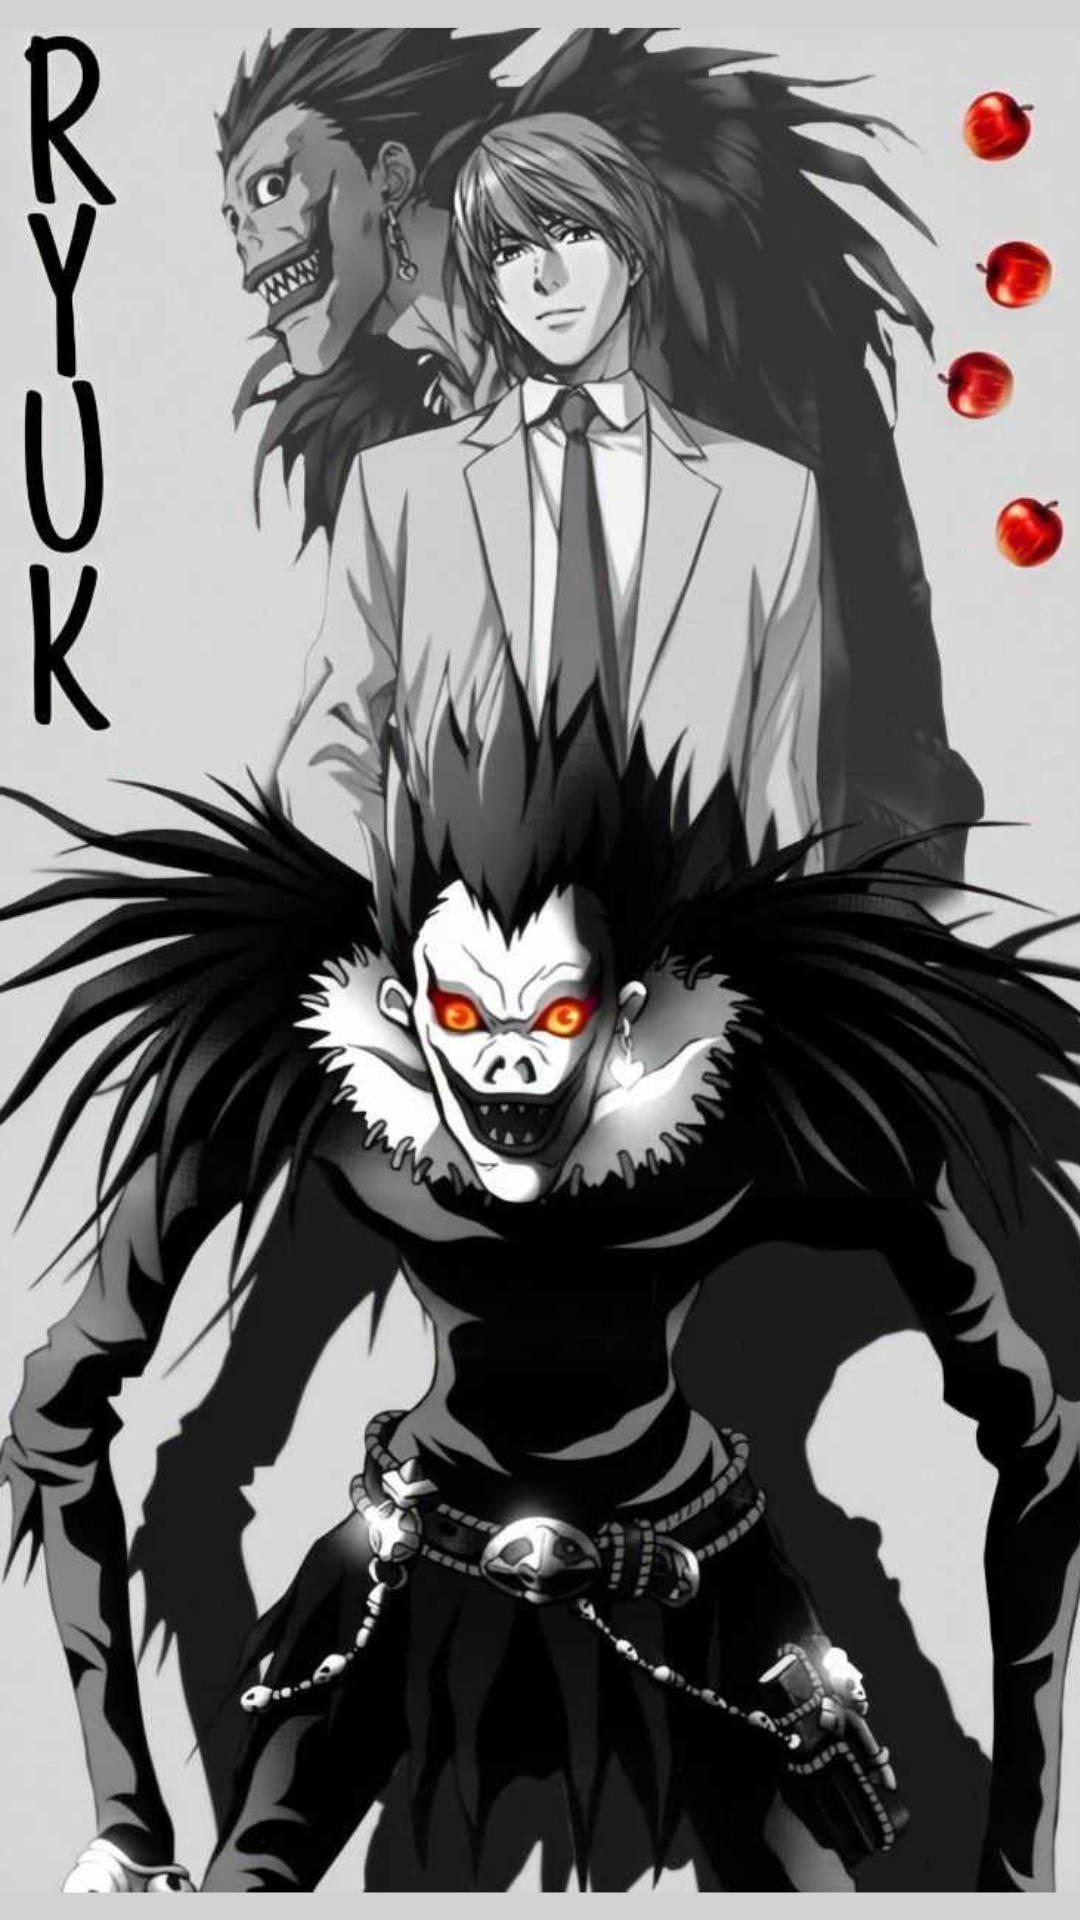 Poster Ryuk And Light Death Note iPhone Wallpaper